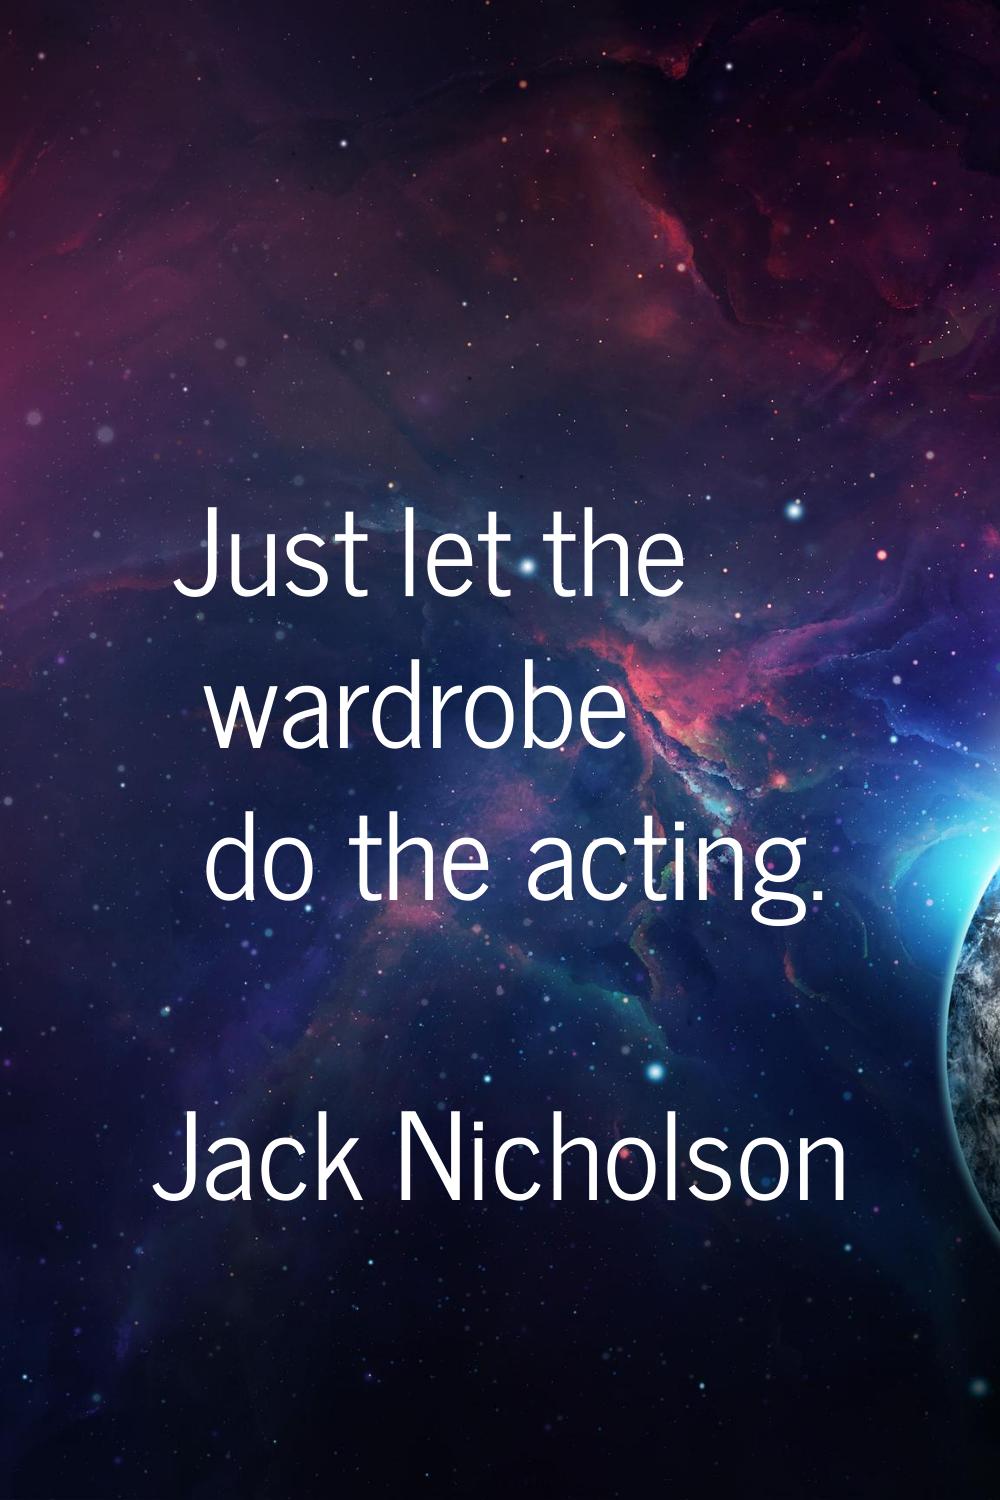 Just let the wardrobe do the acting.